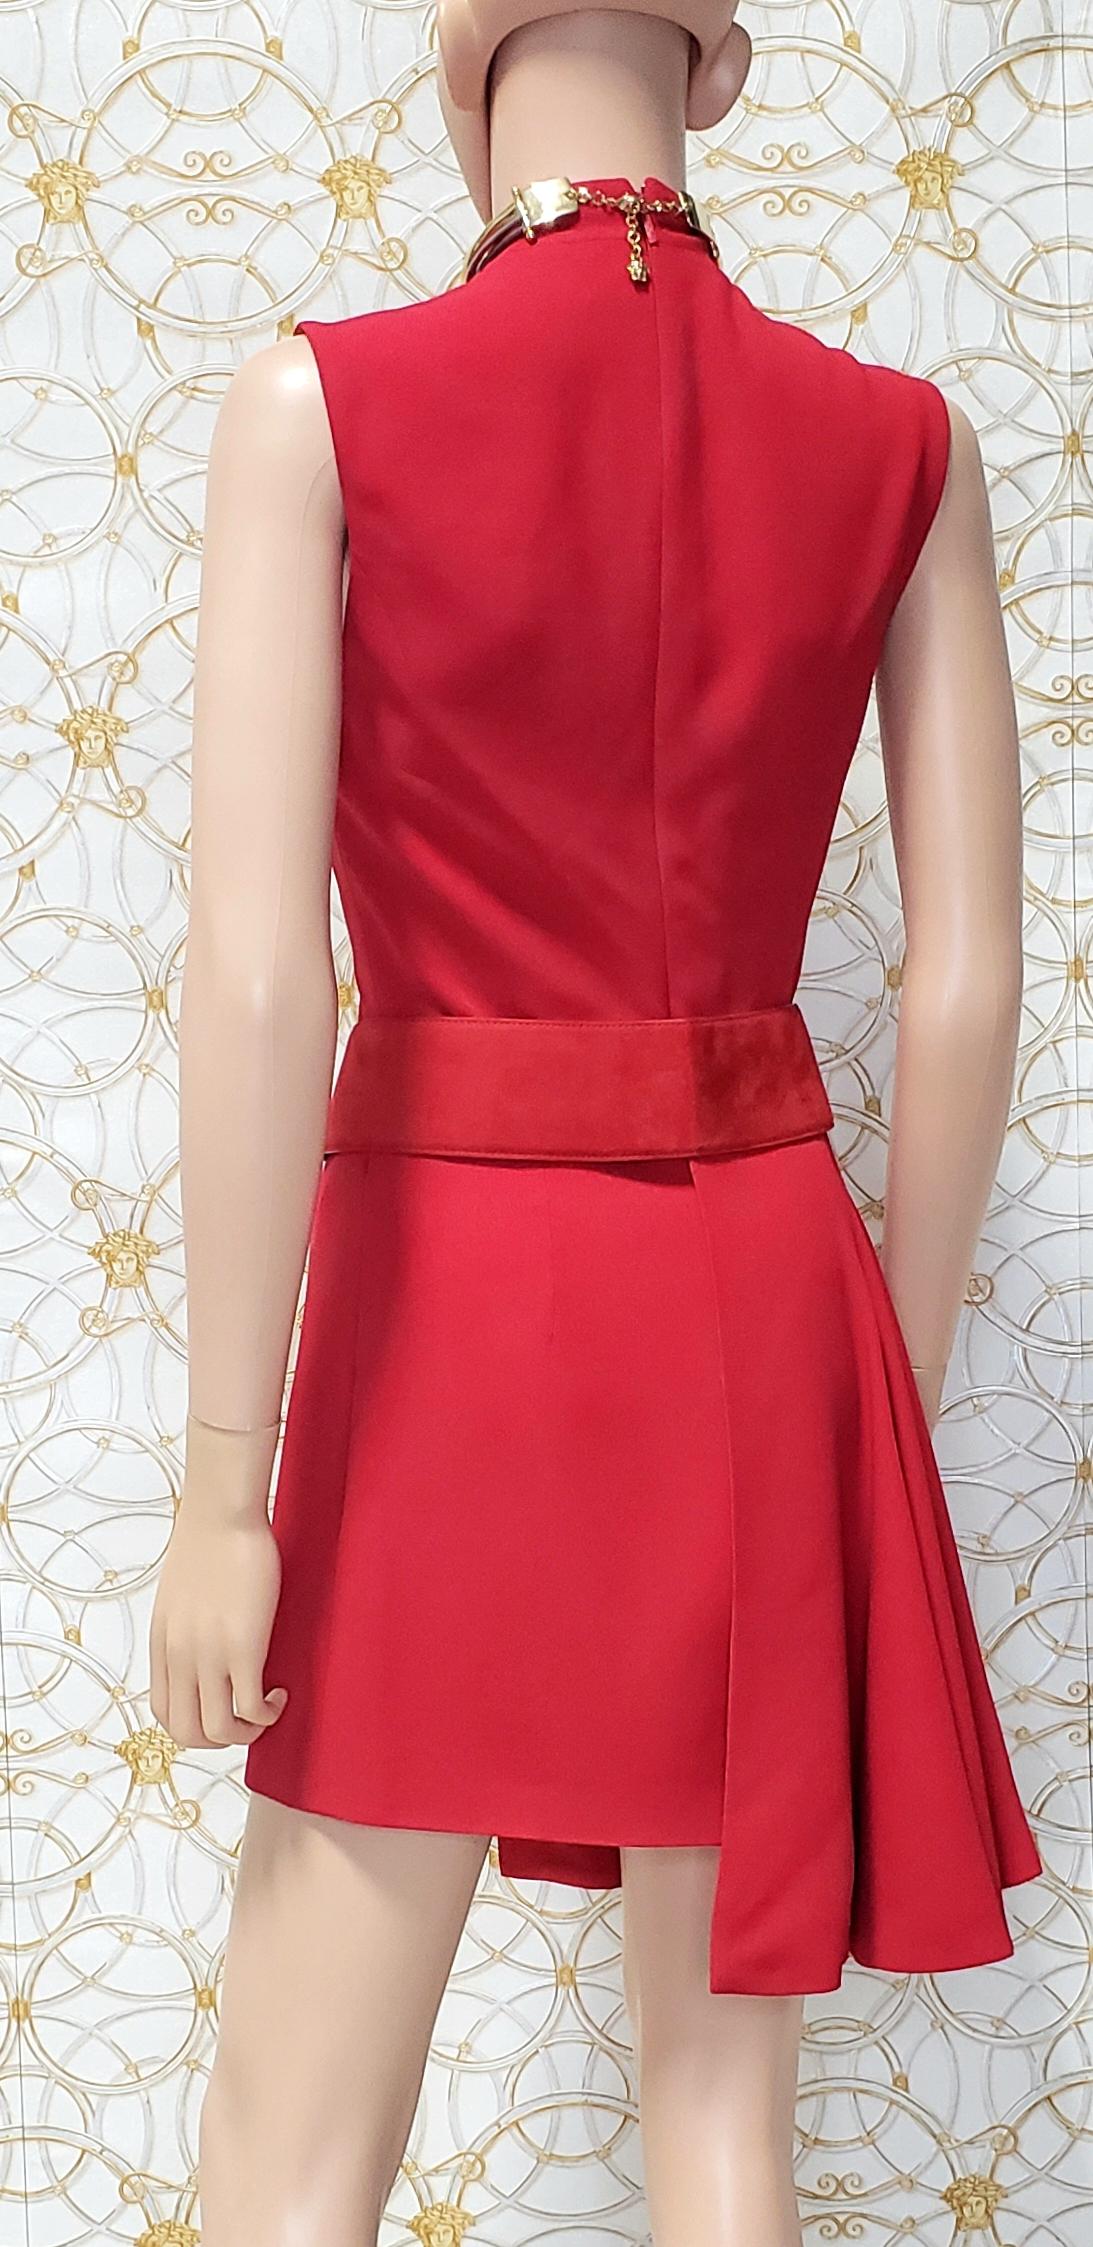 NEW VERSACE RED SILK DRESS AS SEEN ON IRYNA and REESE 38 - 2 For Sale 2